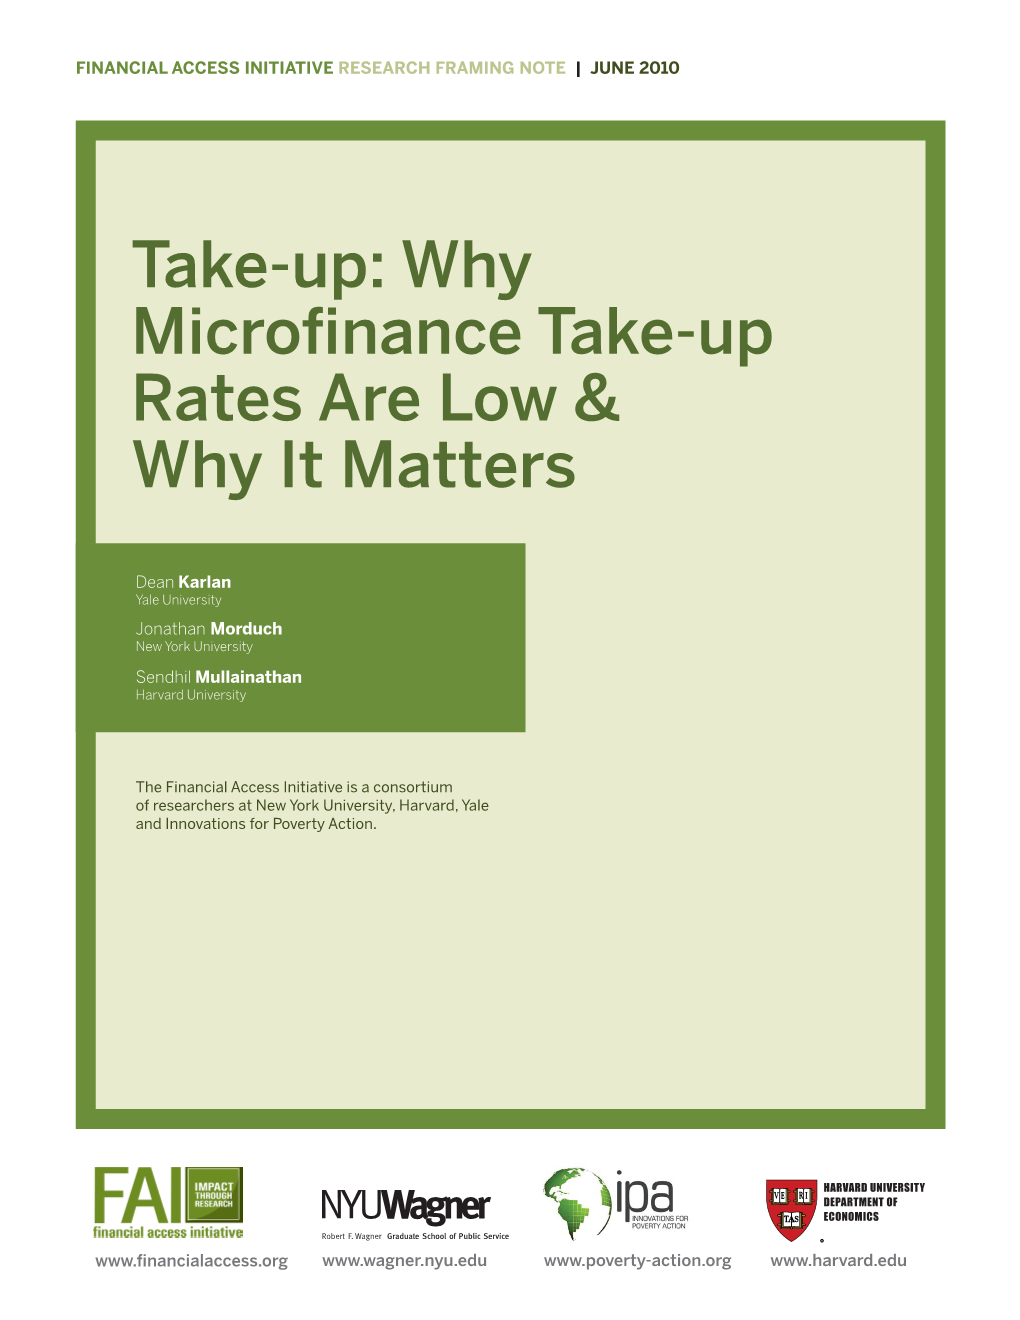 Why Microfinance Take-Up Rates Are Low & Why It Matters